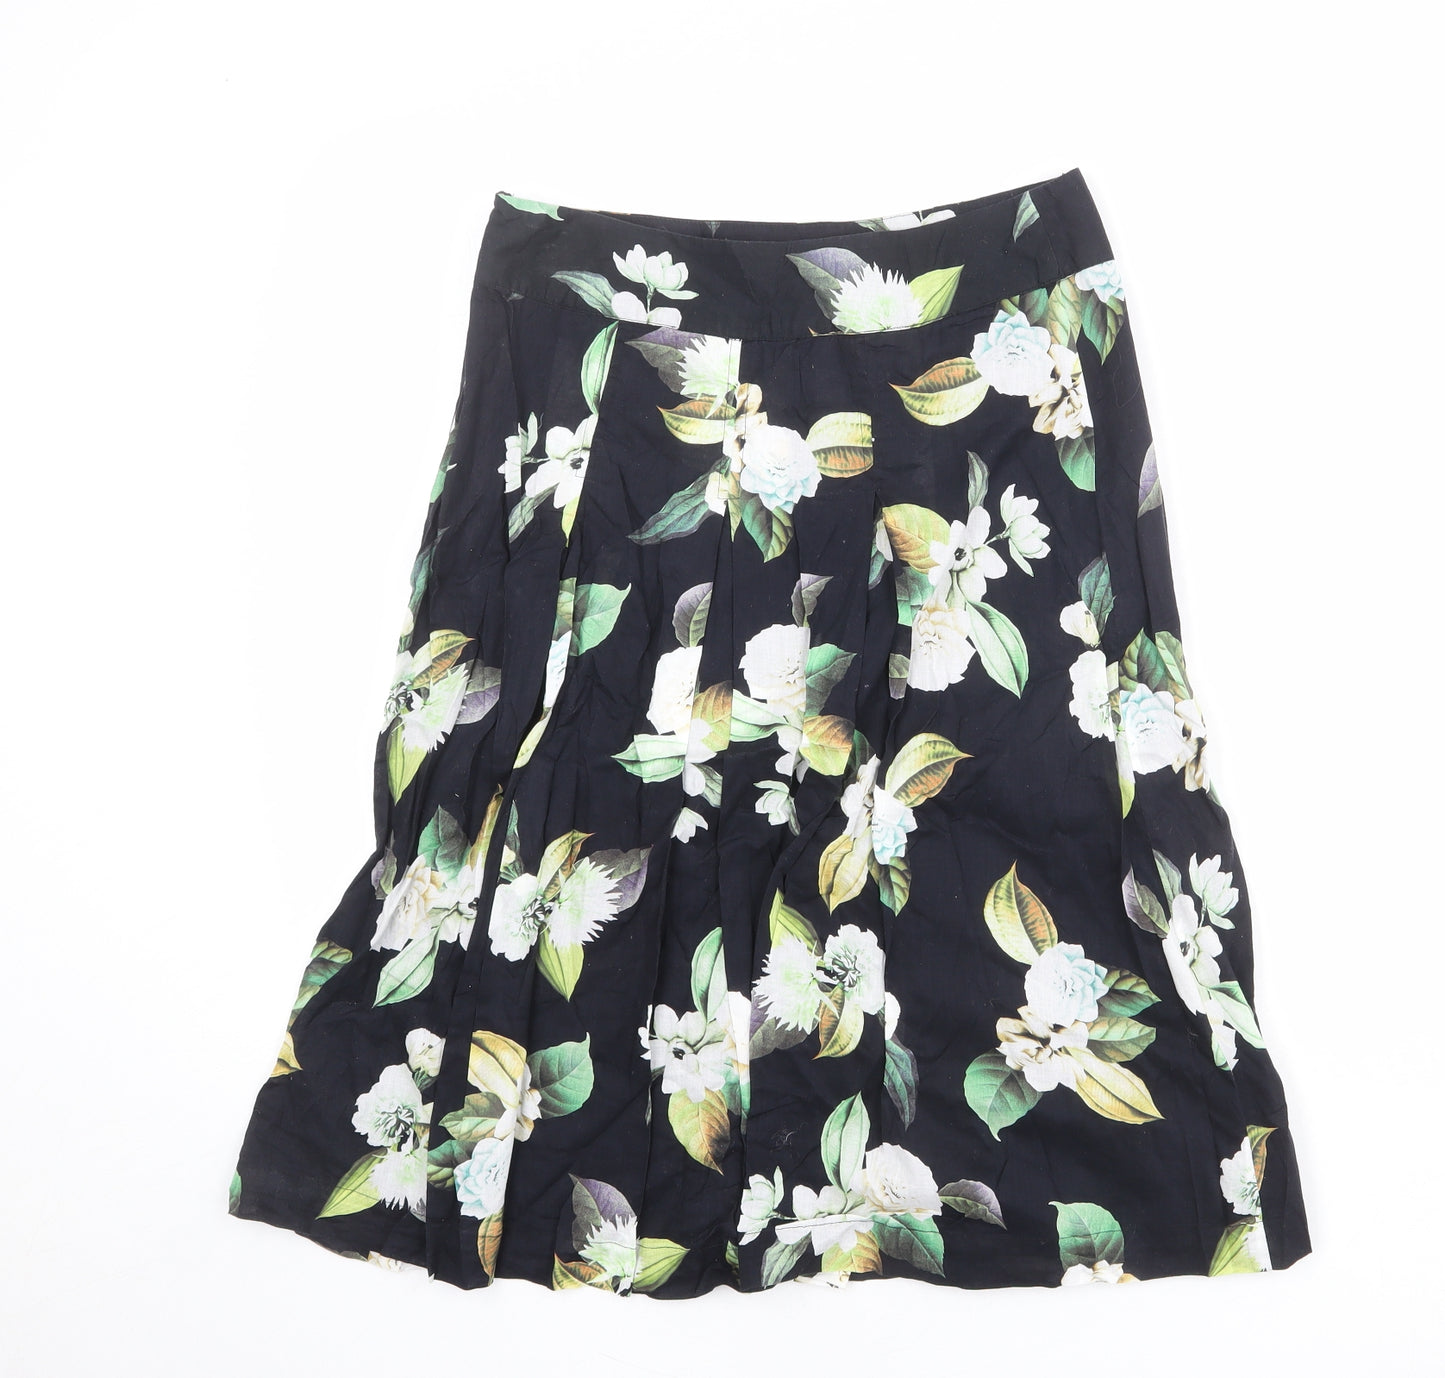 Phase Eight Womens Black Floral Cotton Swing Skirt Size 10 Zip